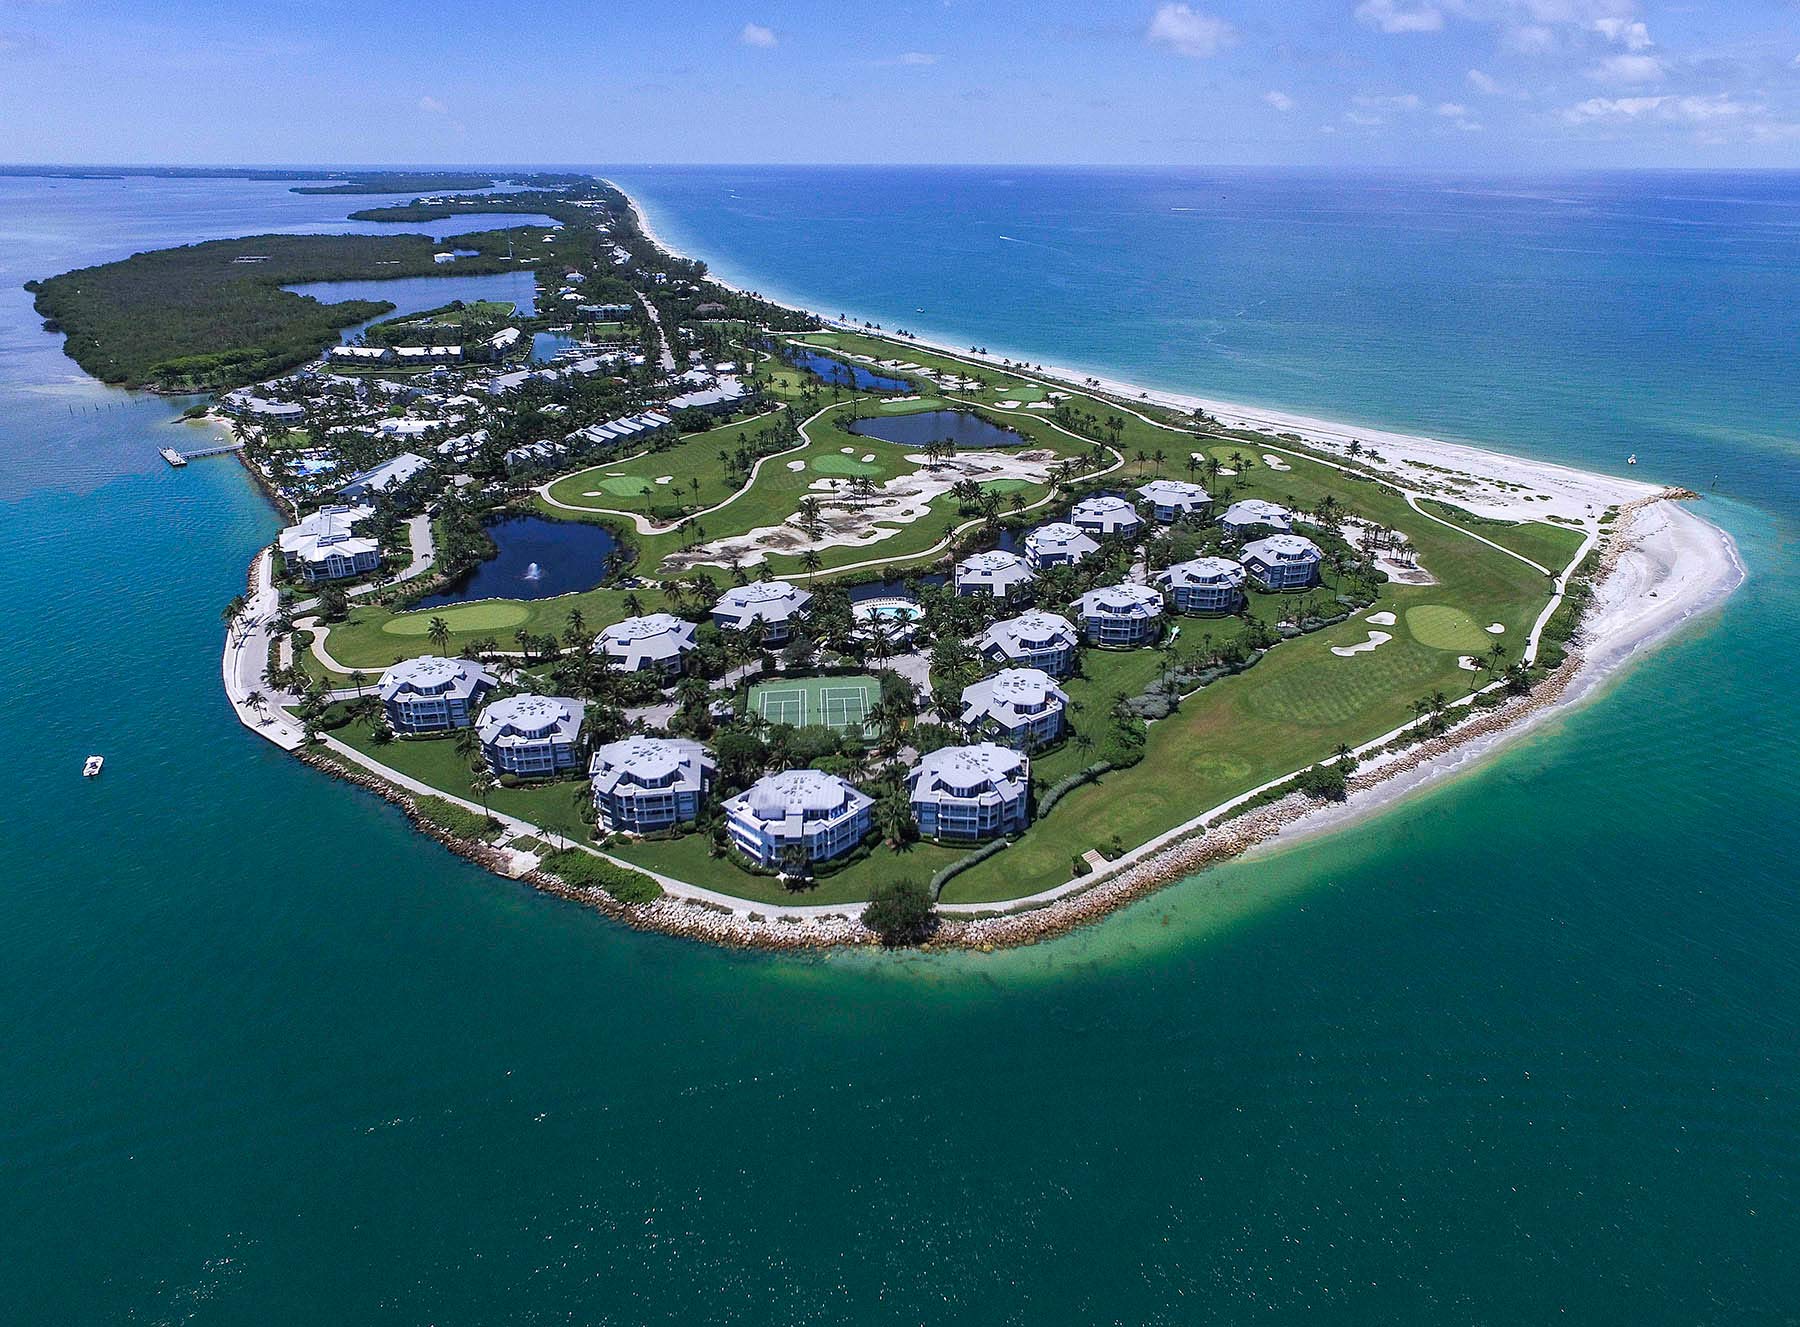 This is an aerial view of part of Captiva Island. If you click on 